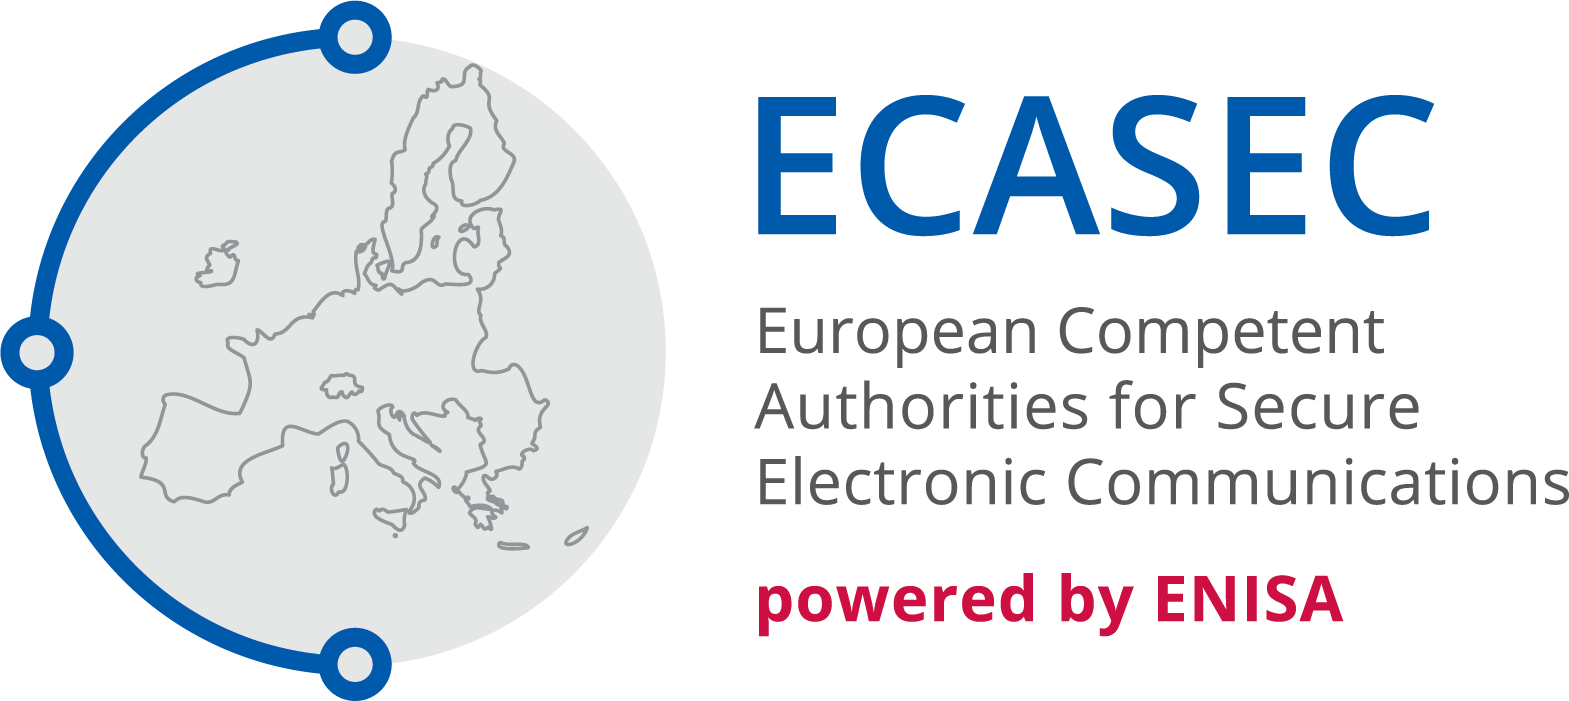 The image shows the logo of the ECASEC EG